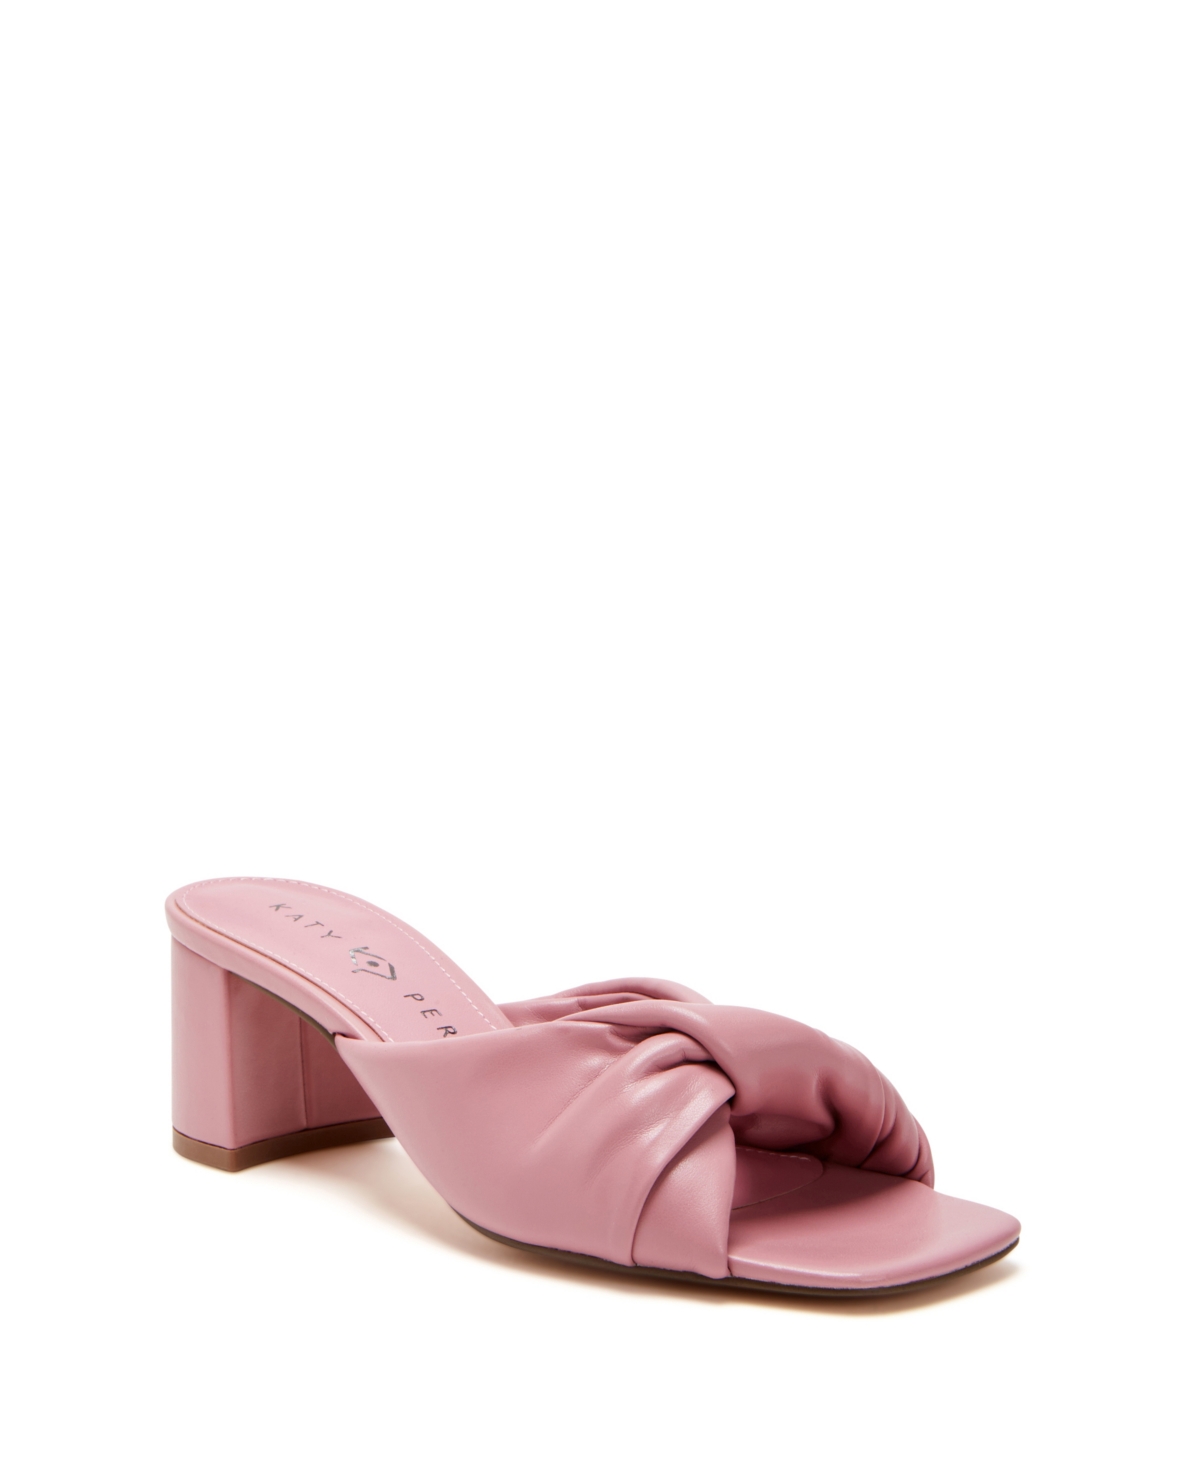 Women's The Tooliped Twisted Slip-on Sandals - Vintage Pink